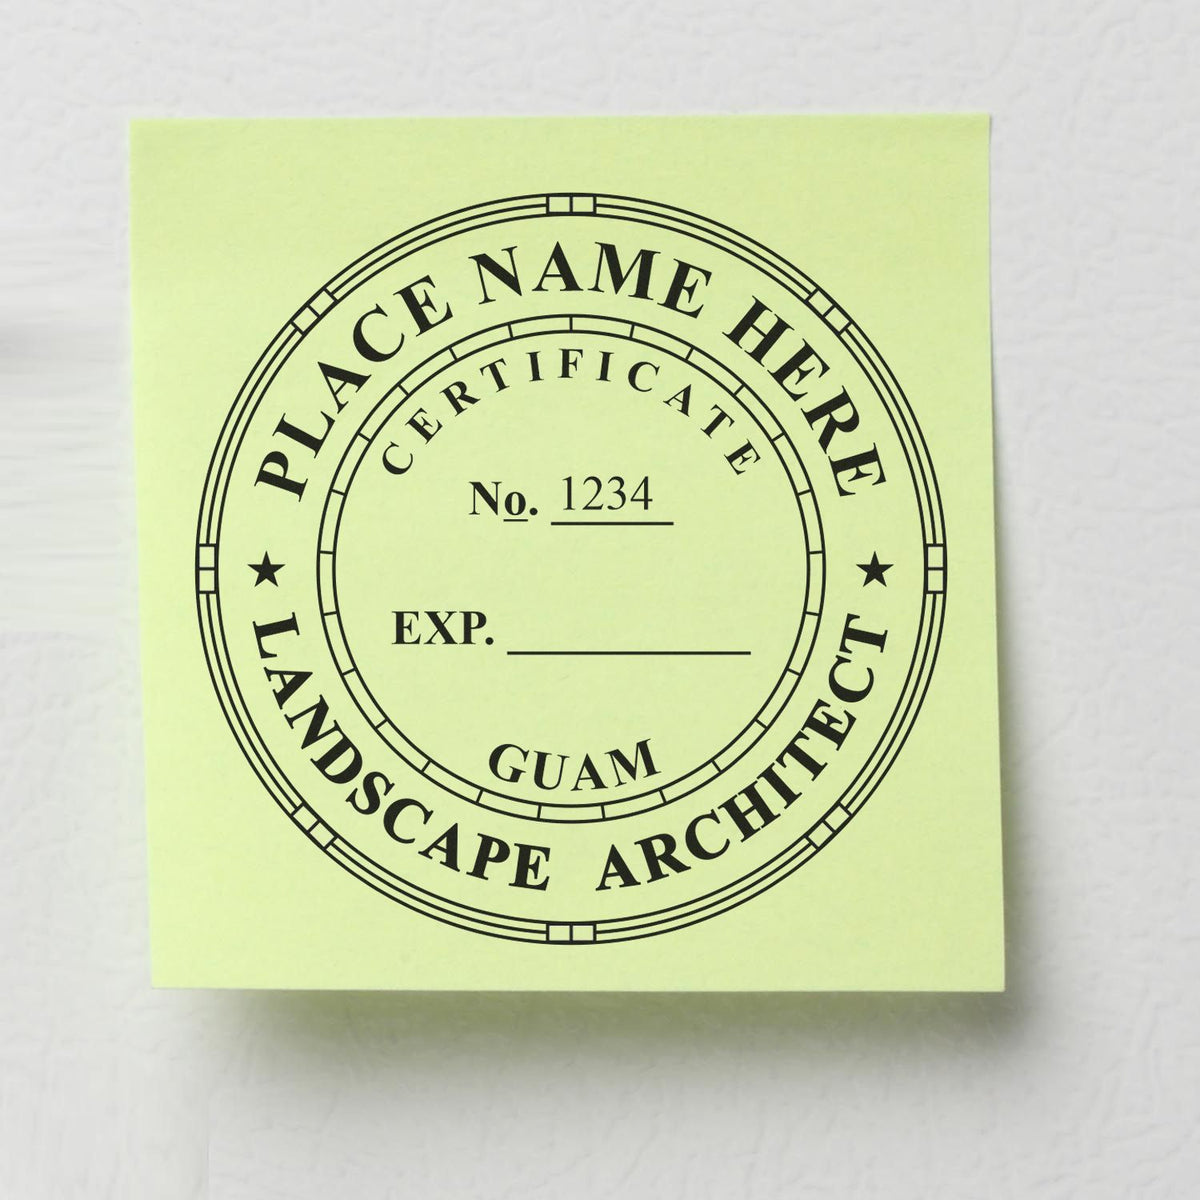 A lifestyle photo showing a stamped image of the Digital Guam Landscape Architect Stamp on a piece of paper